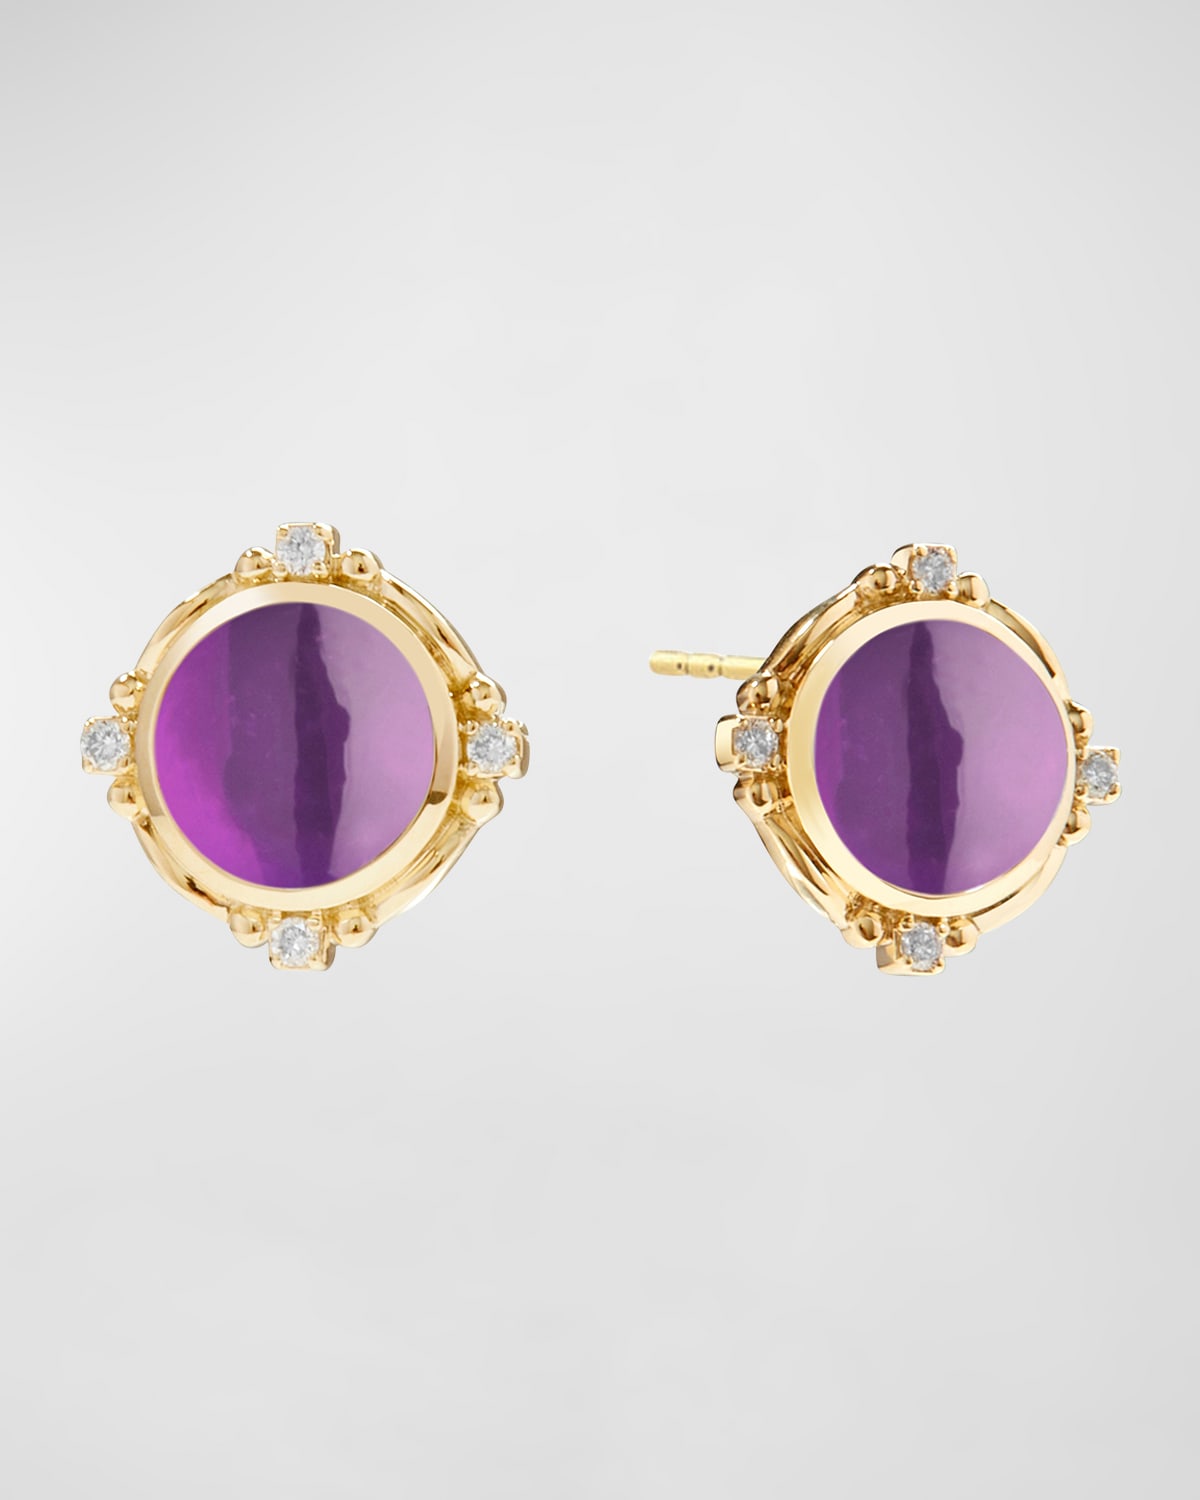 Syna 18k Yellow Gold Mogul Earrings With Gemstones And Diamonds In Amethyst